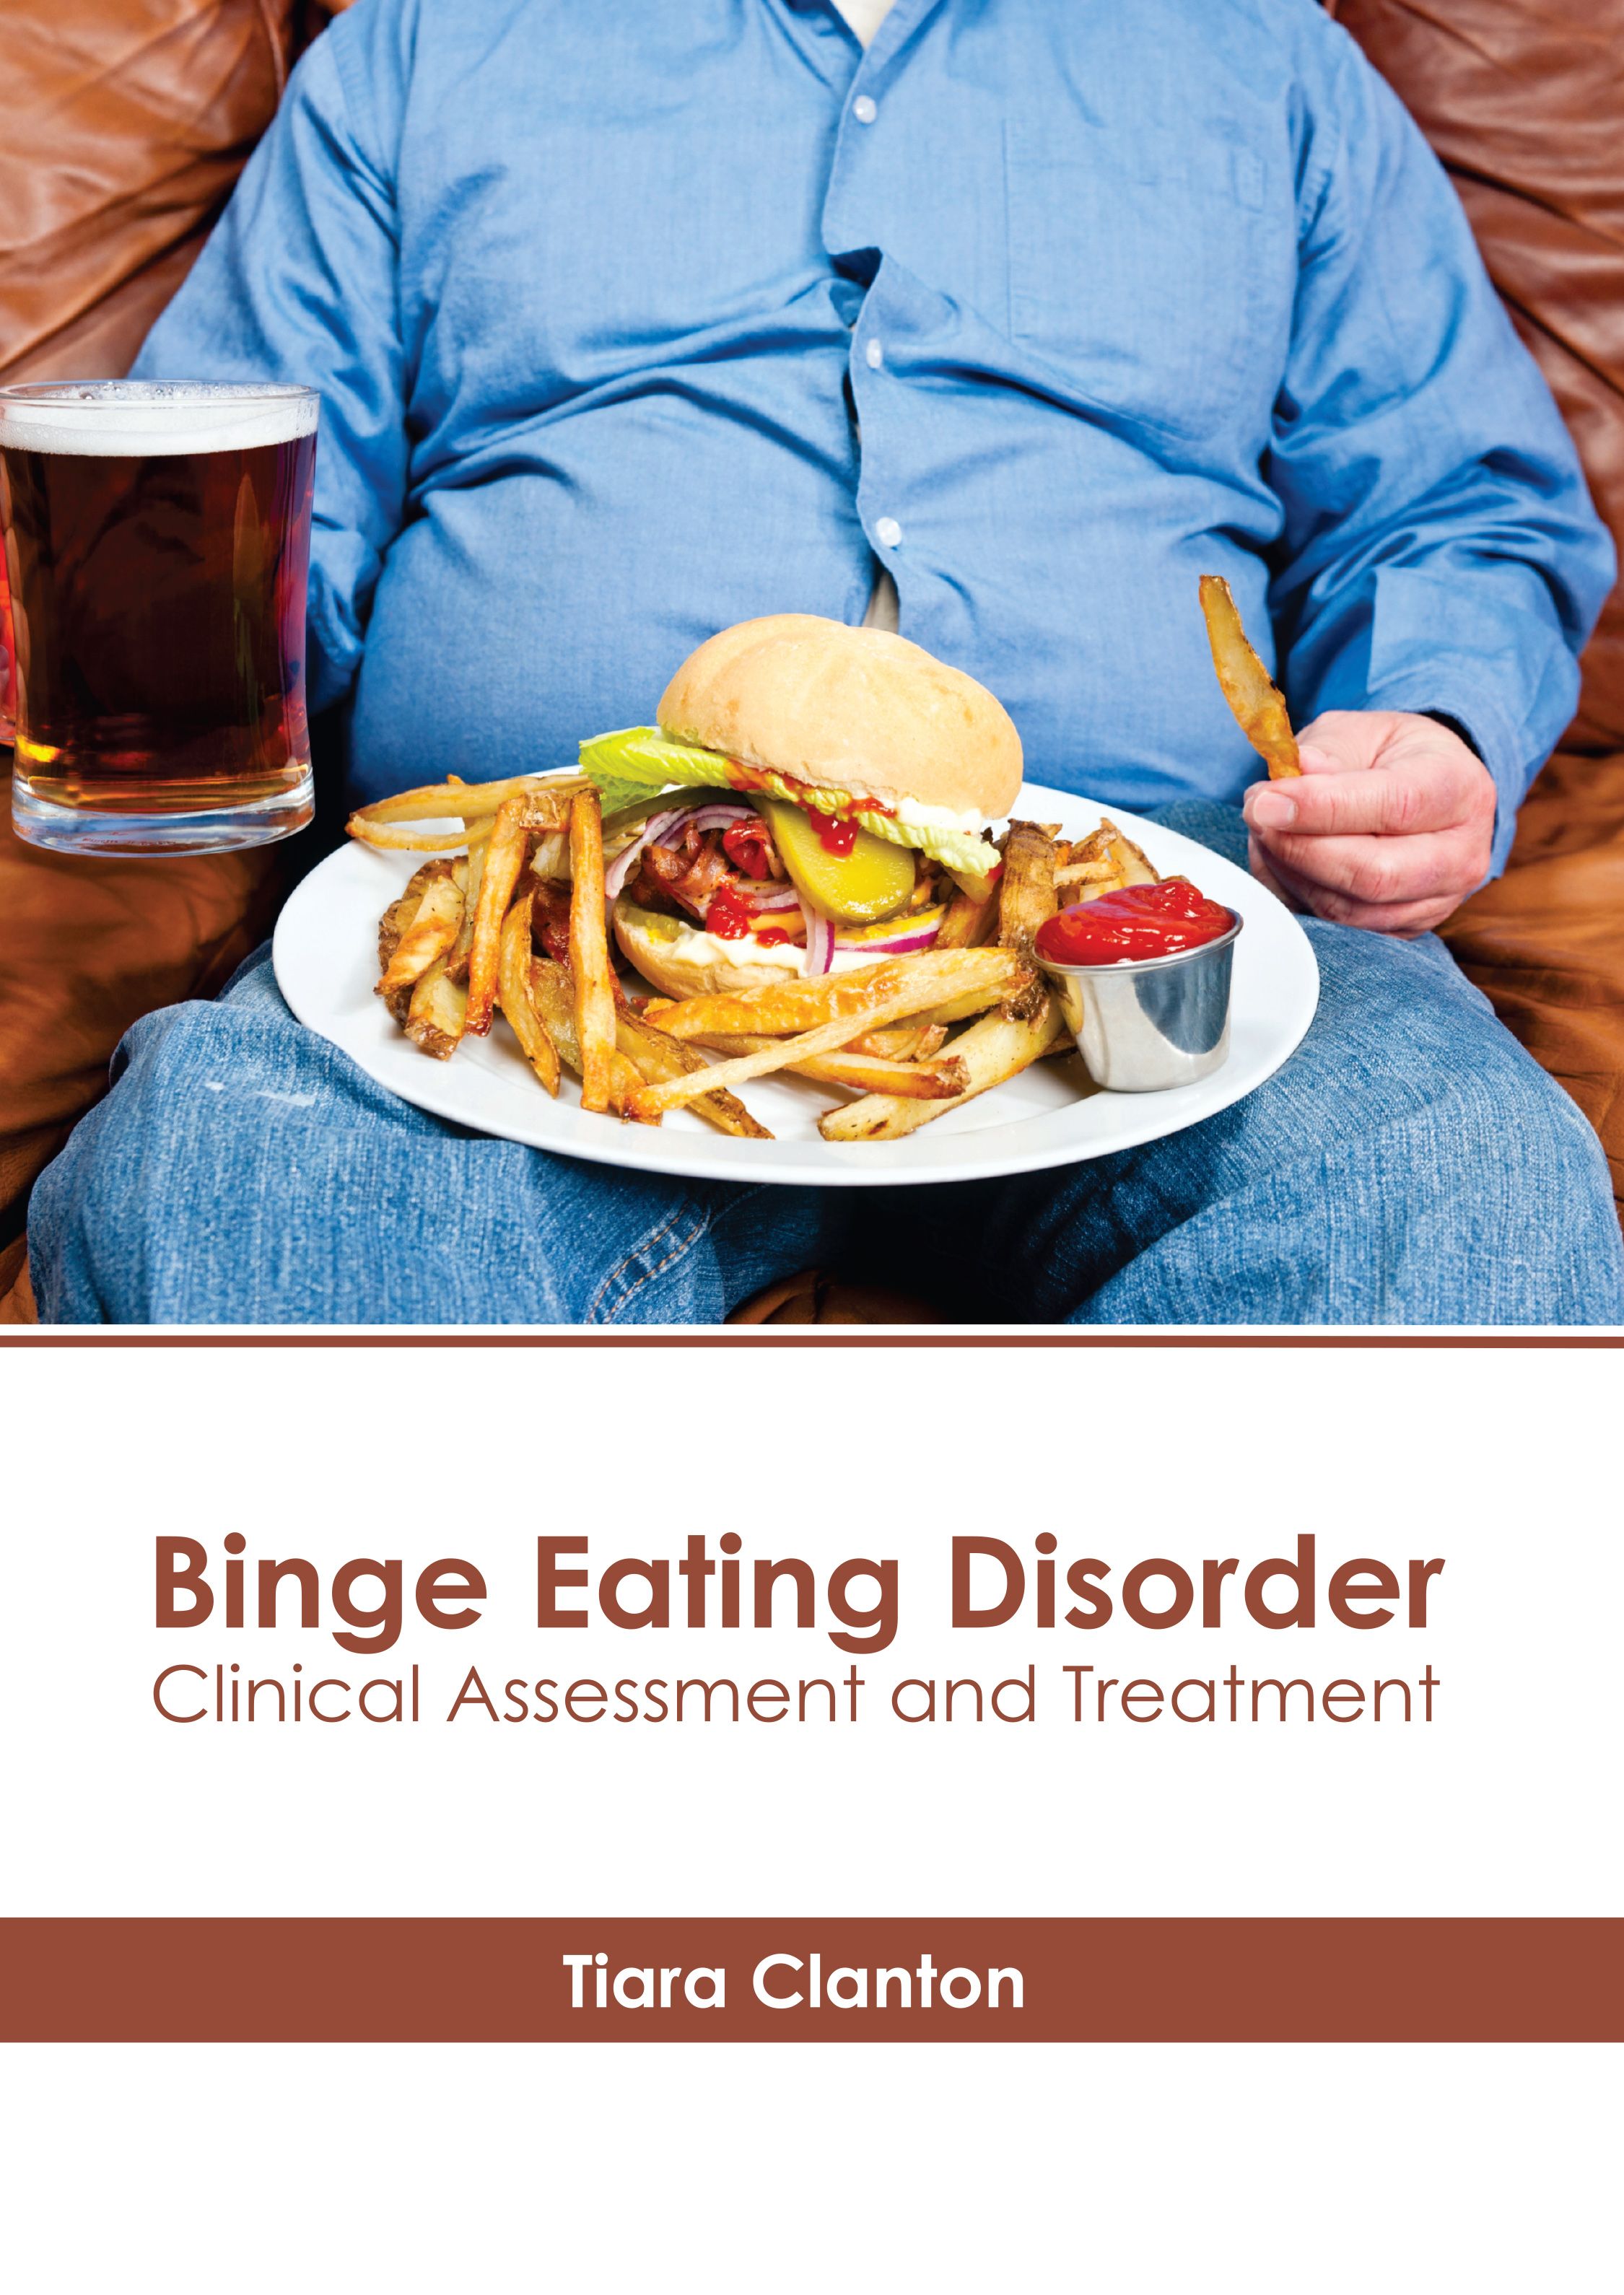 

exclusive-publishers/american-medical-publishers/binge-eating-disorder-clinical-assessment-and-treatment-9781639279166